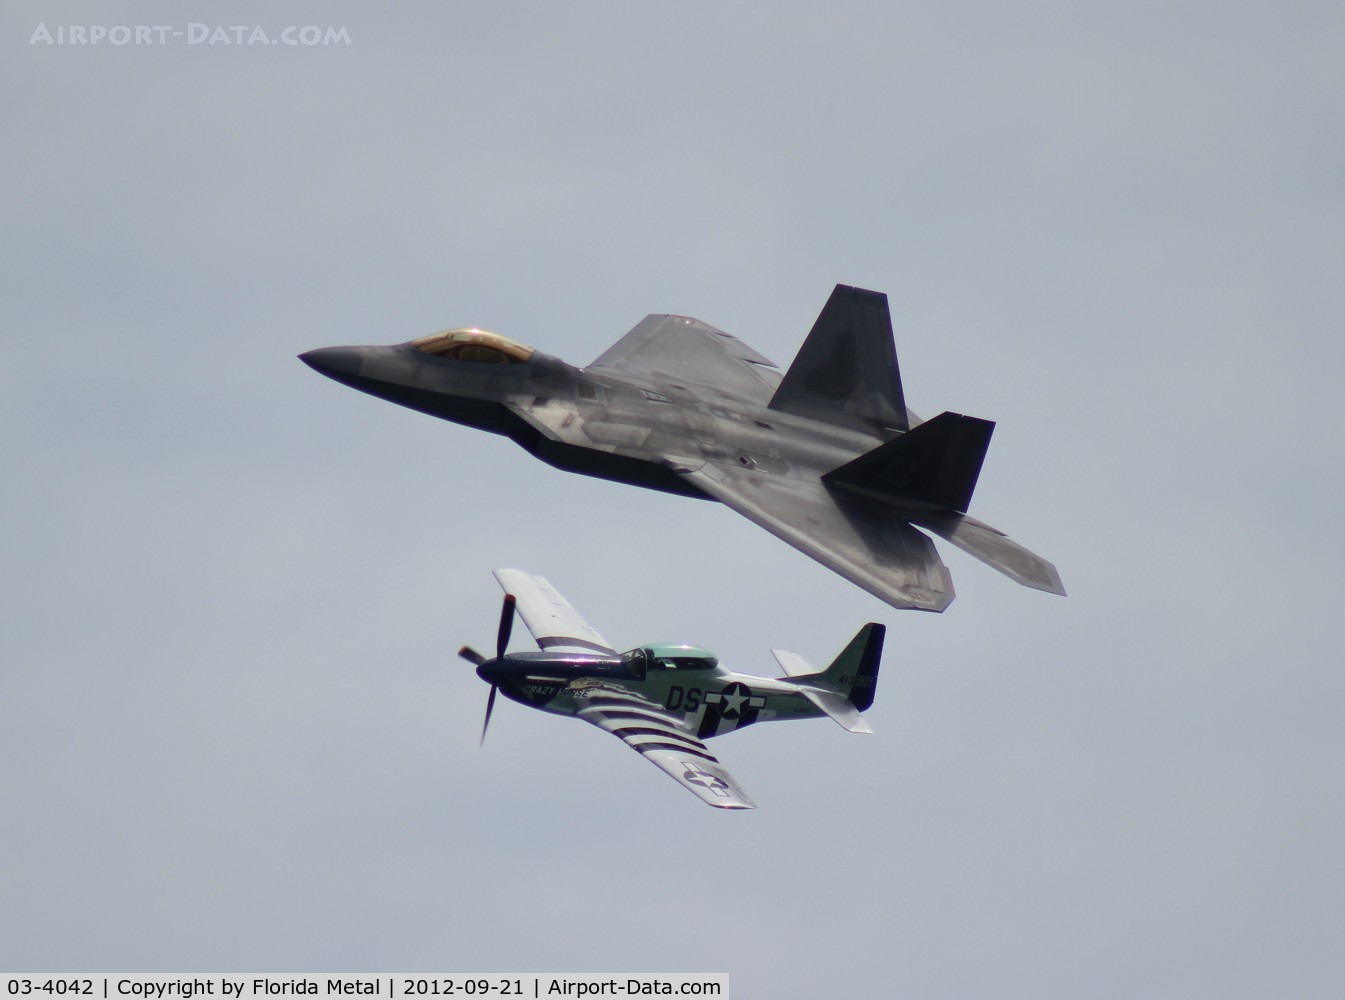 03-4042, 2003 Lockheed Martin F/A-22A Raptor C/N 4042, F-22 heritage flight with P-51D Crazy Horse at Cocoa Beach